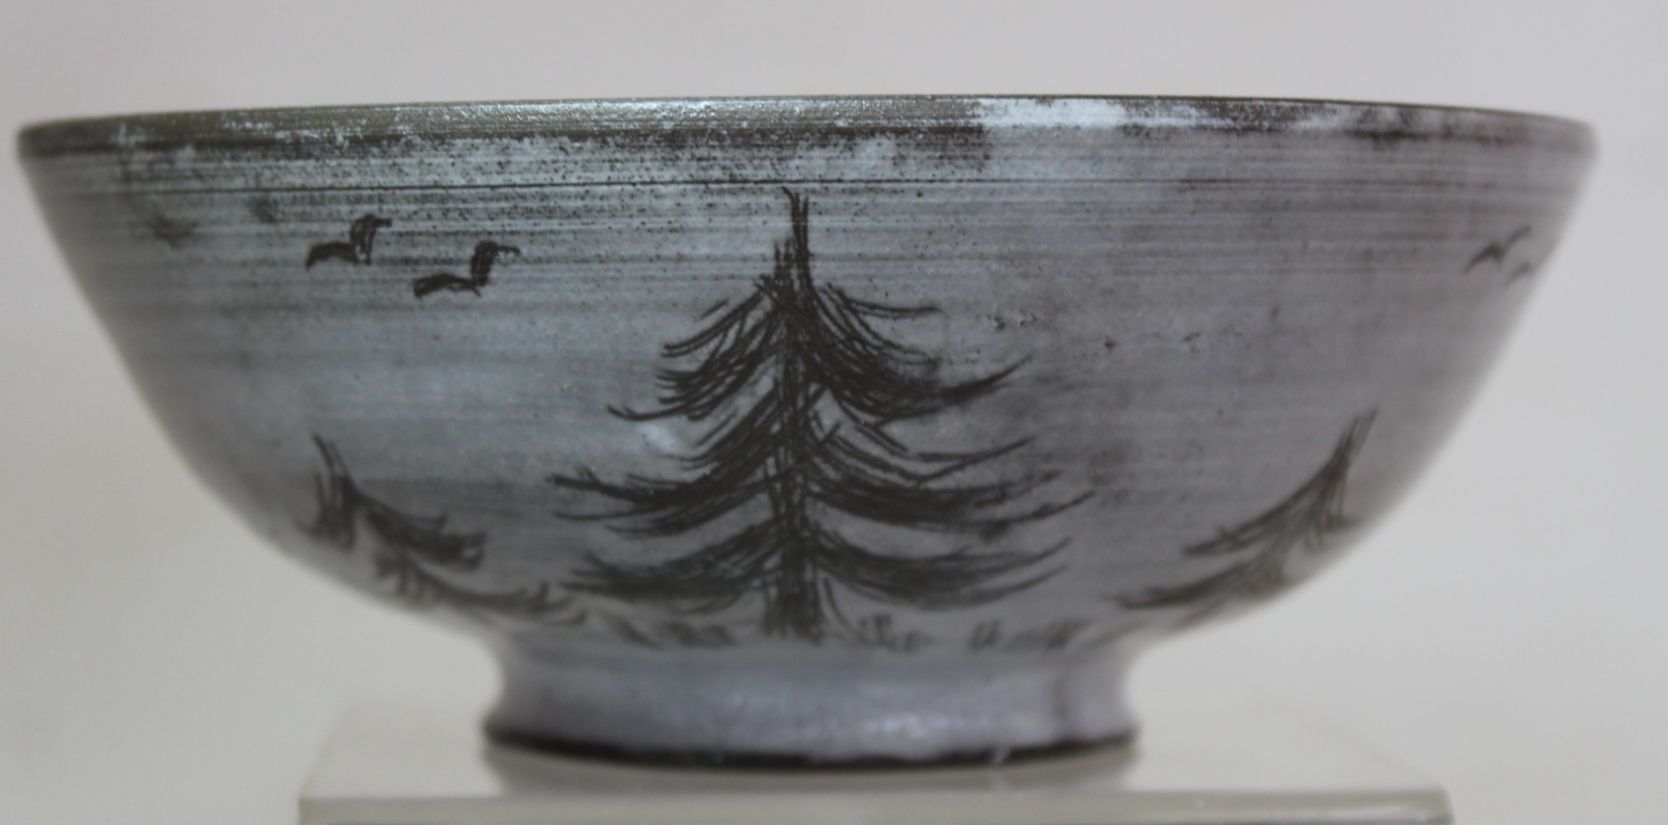 Two studio pottery small circular bowls, both with sgraffito decoration of trees, one with duck - Image 6 of 9